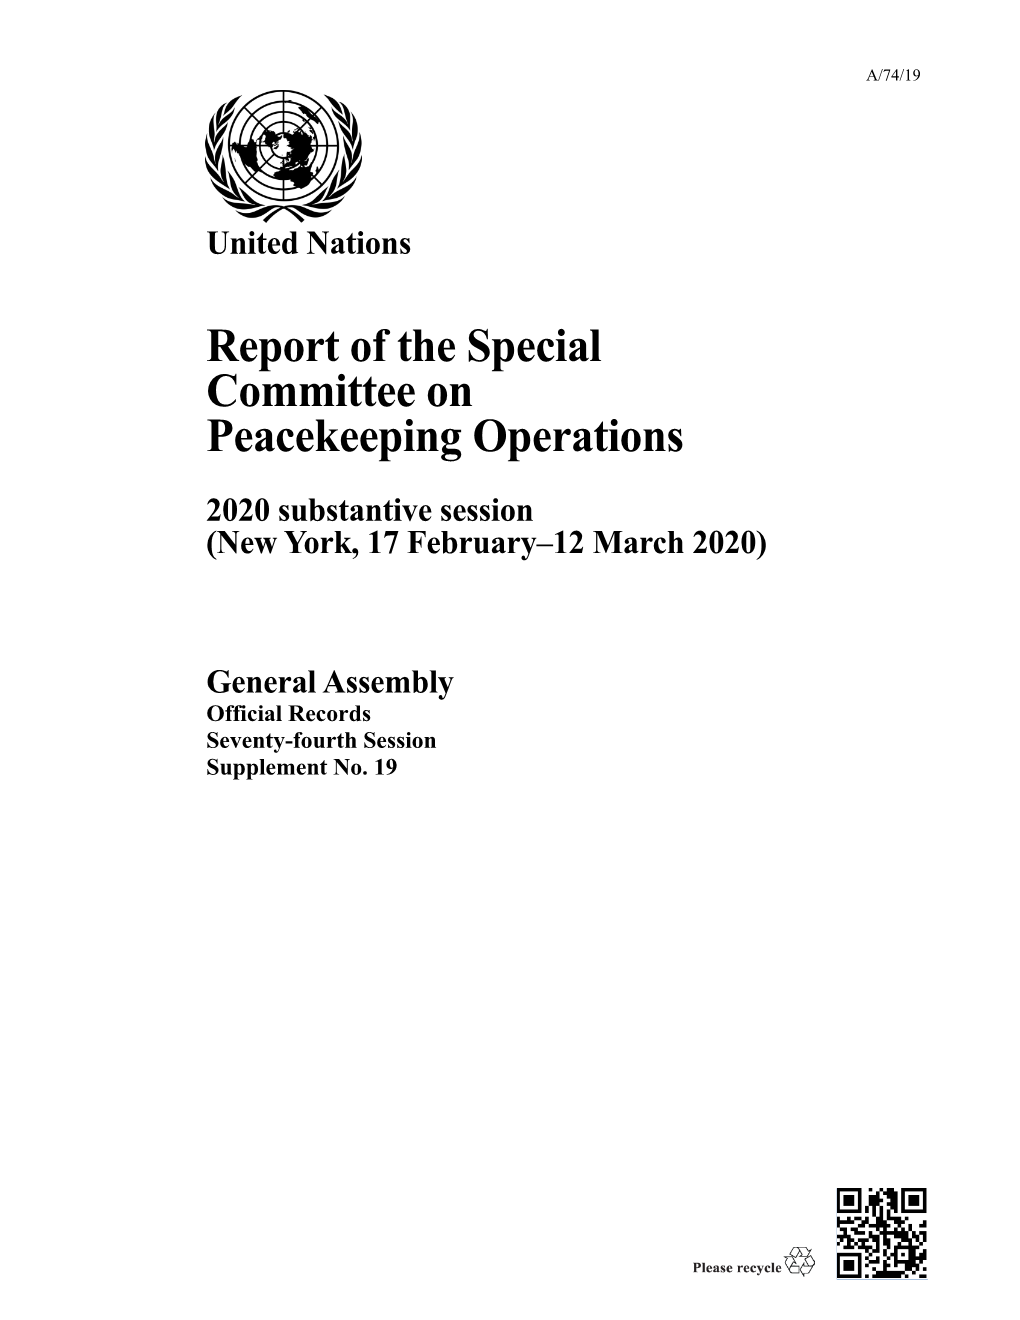 Report of the Special Committee on Peacekeeping Operations